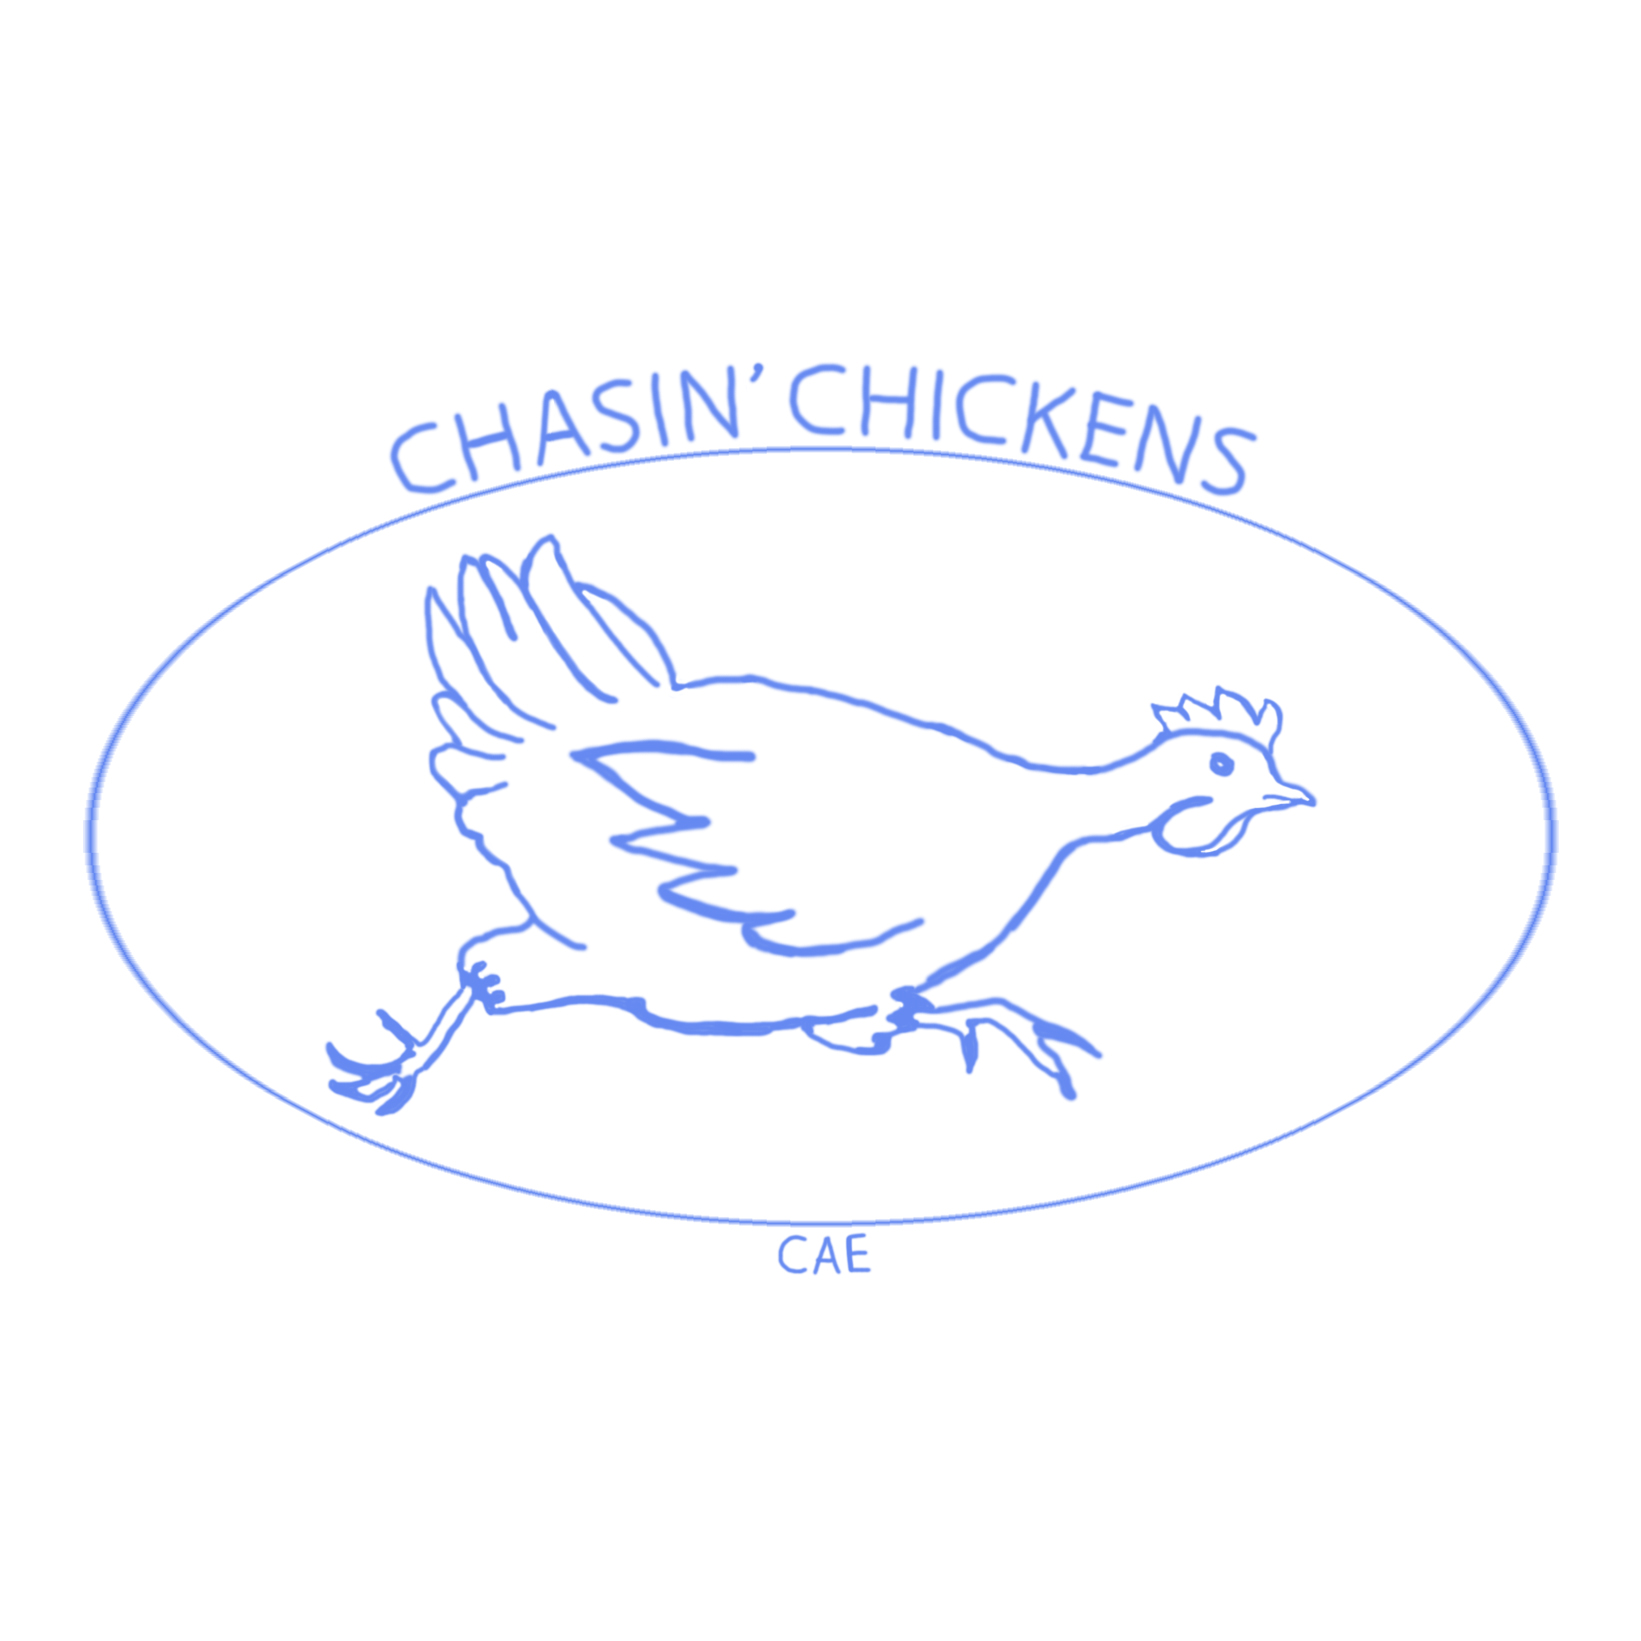 Chasin Chickens demo track by CAE